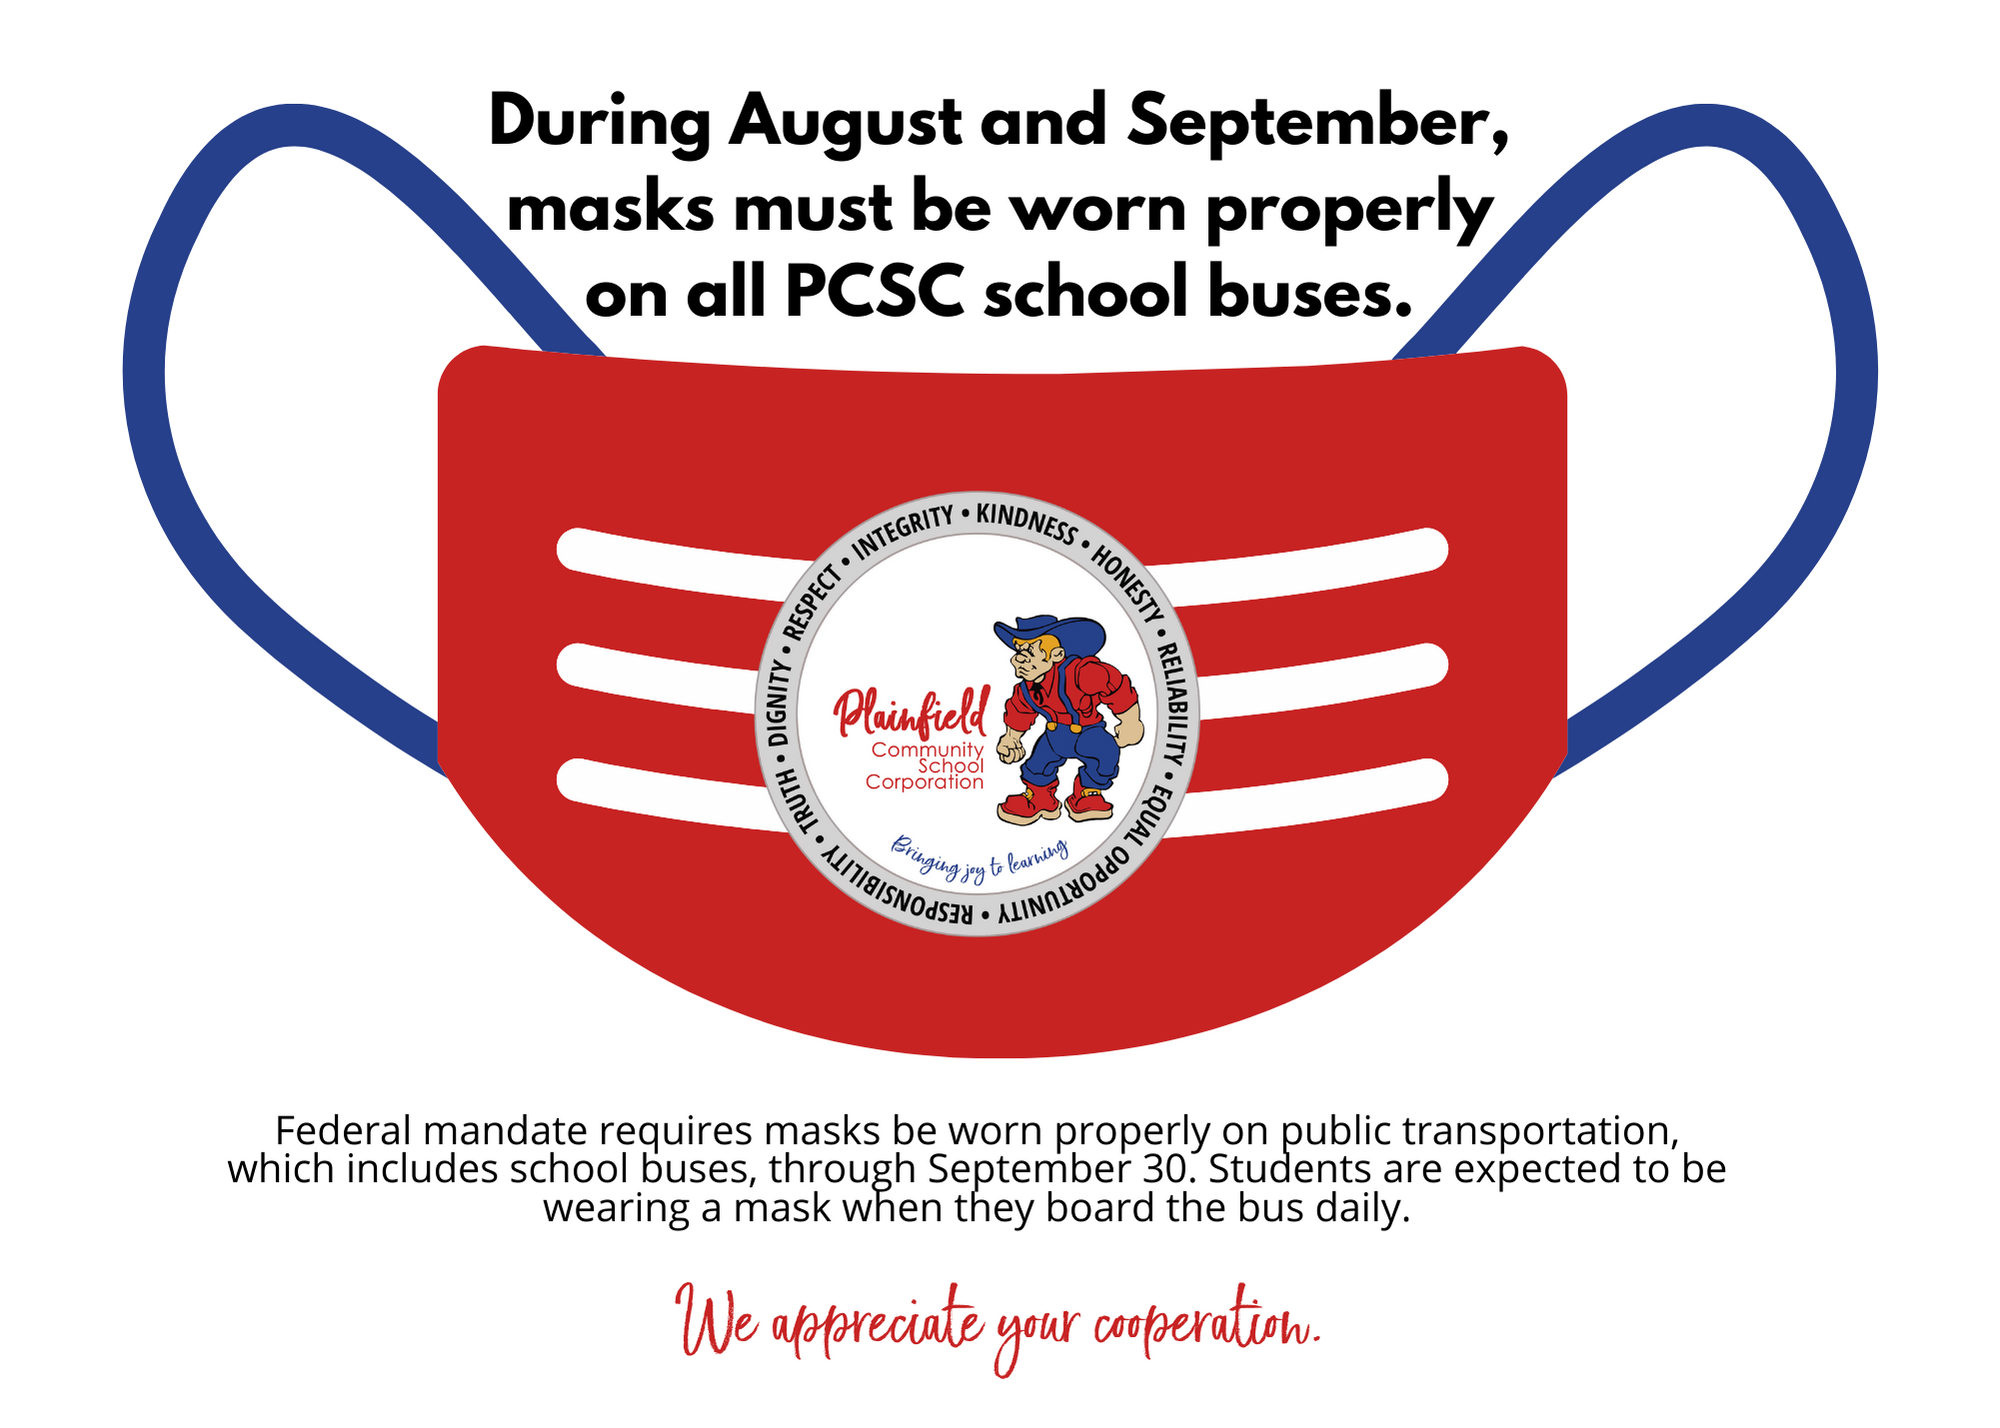 Masks are required on school buses, per federal mandate, through August and September